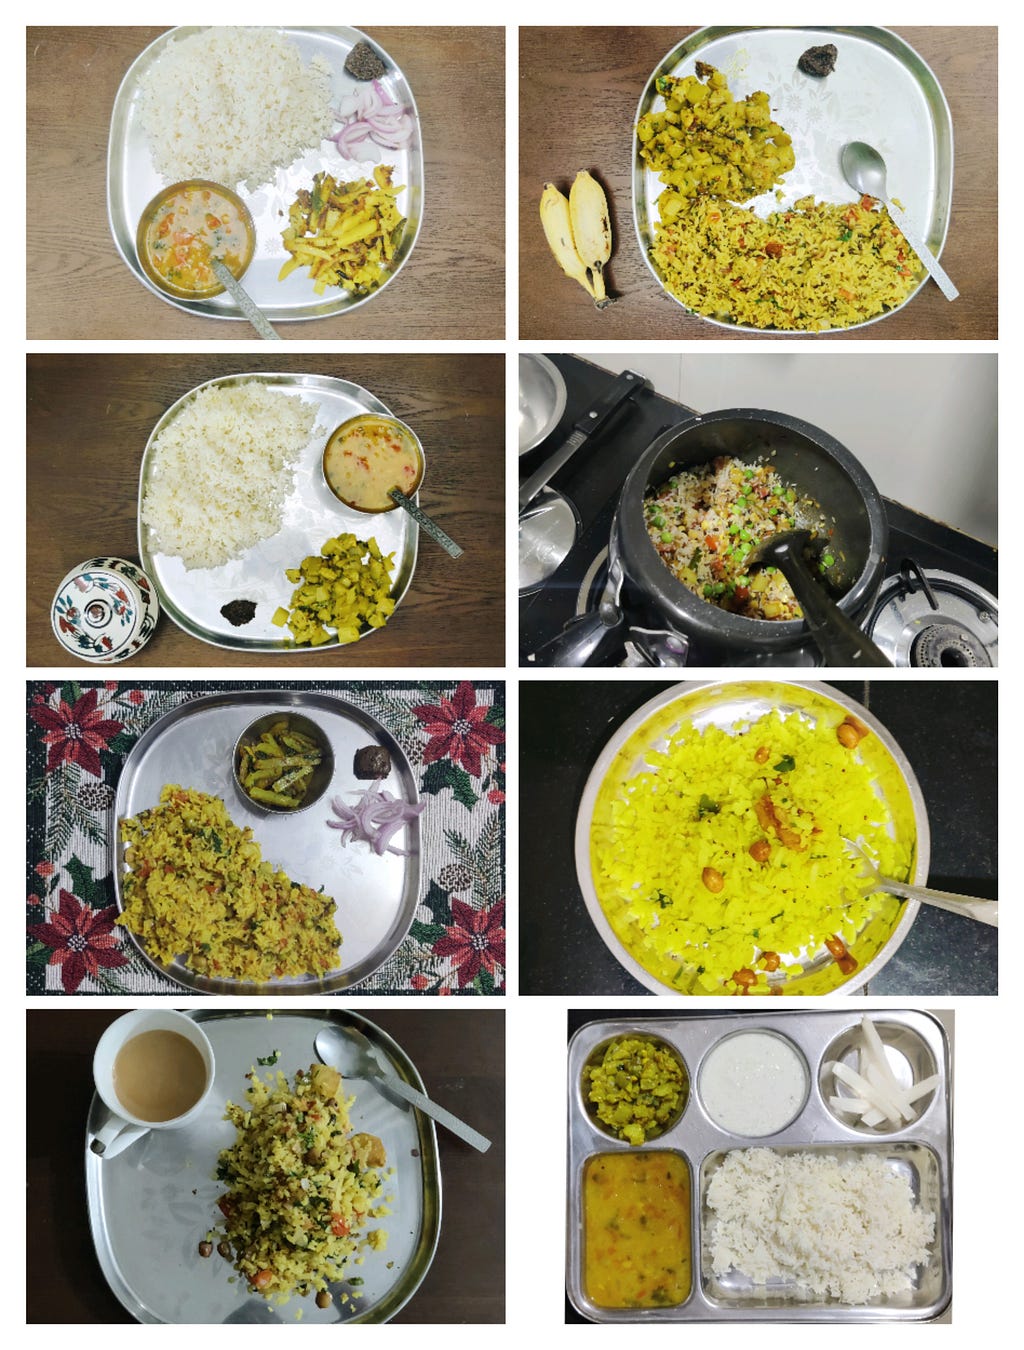 PS : I took few pictures of my food I cooked, as a memoribilia.